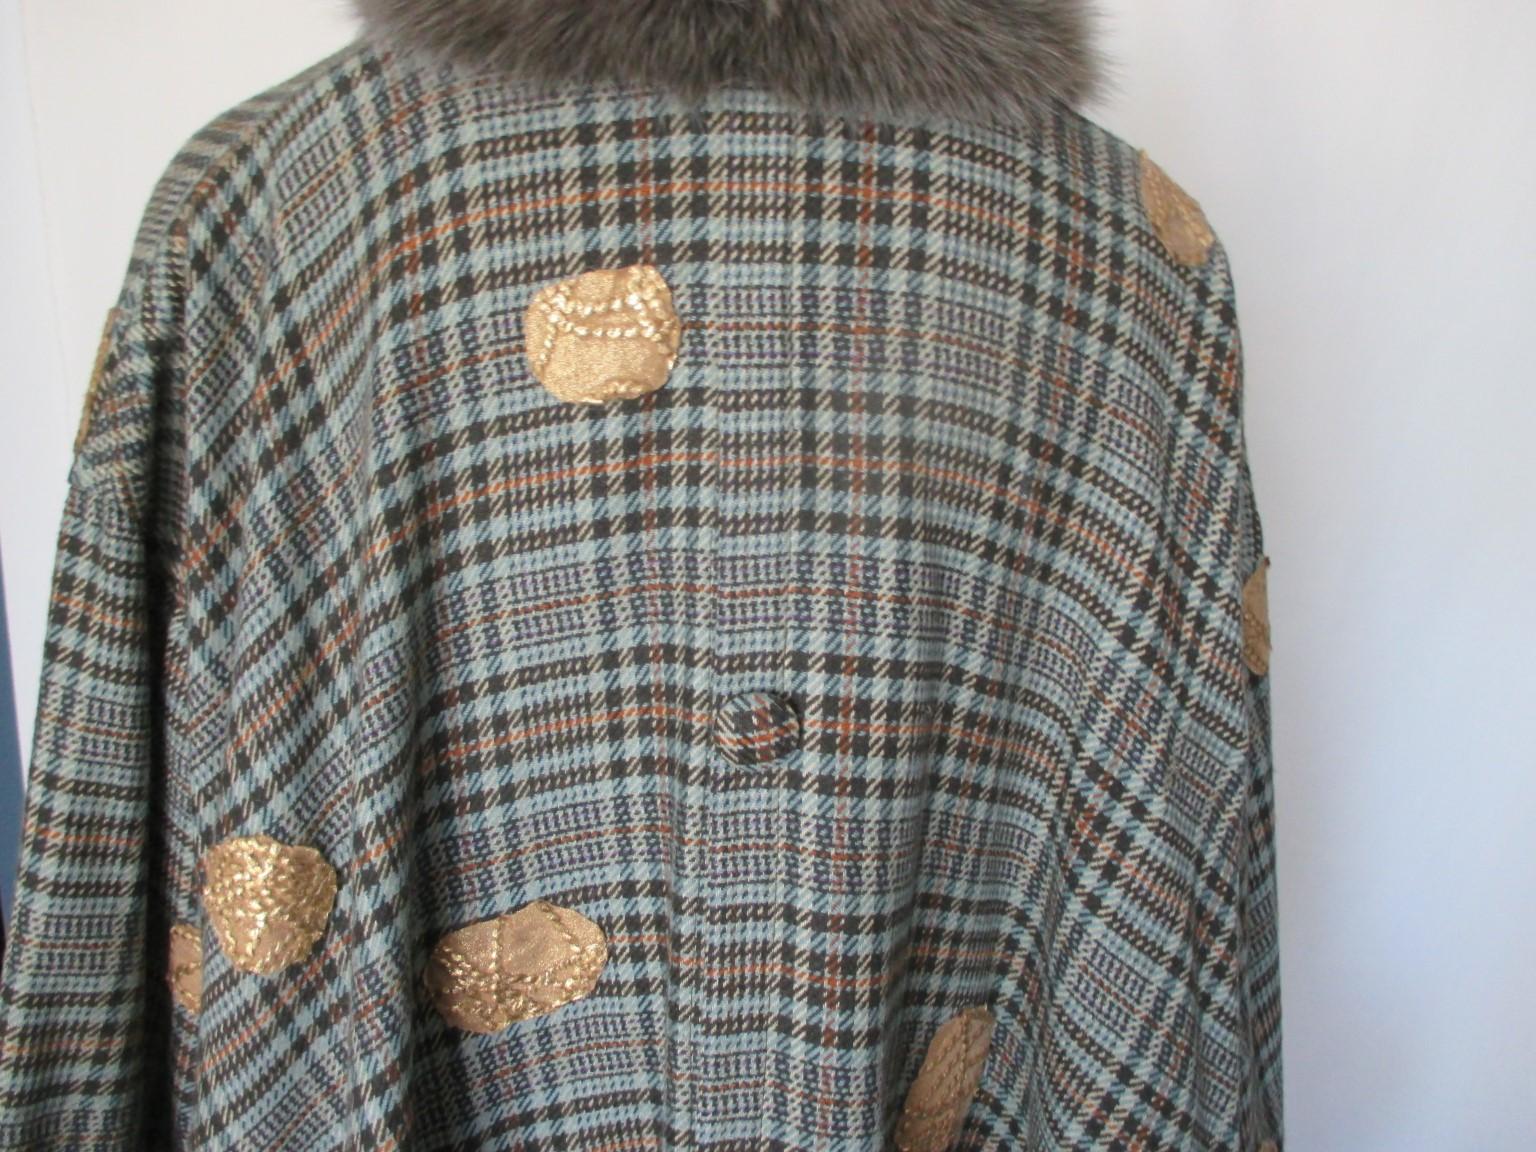  Hippy Chic Checked Wool Fox Fur Stole Cape For Sale 3